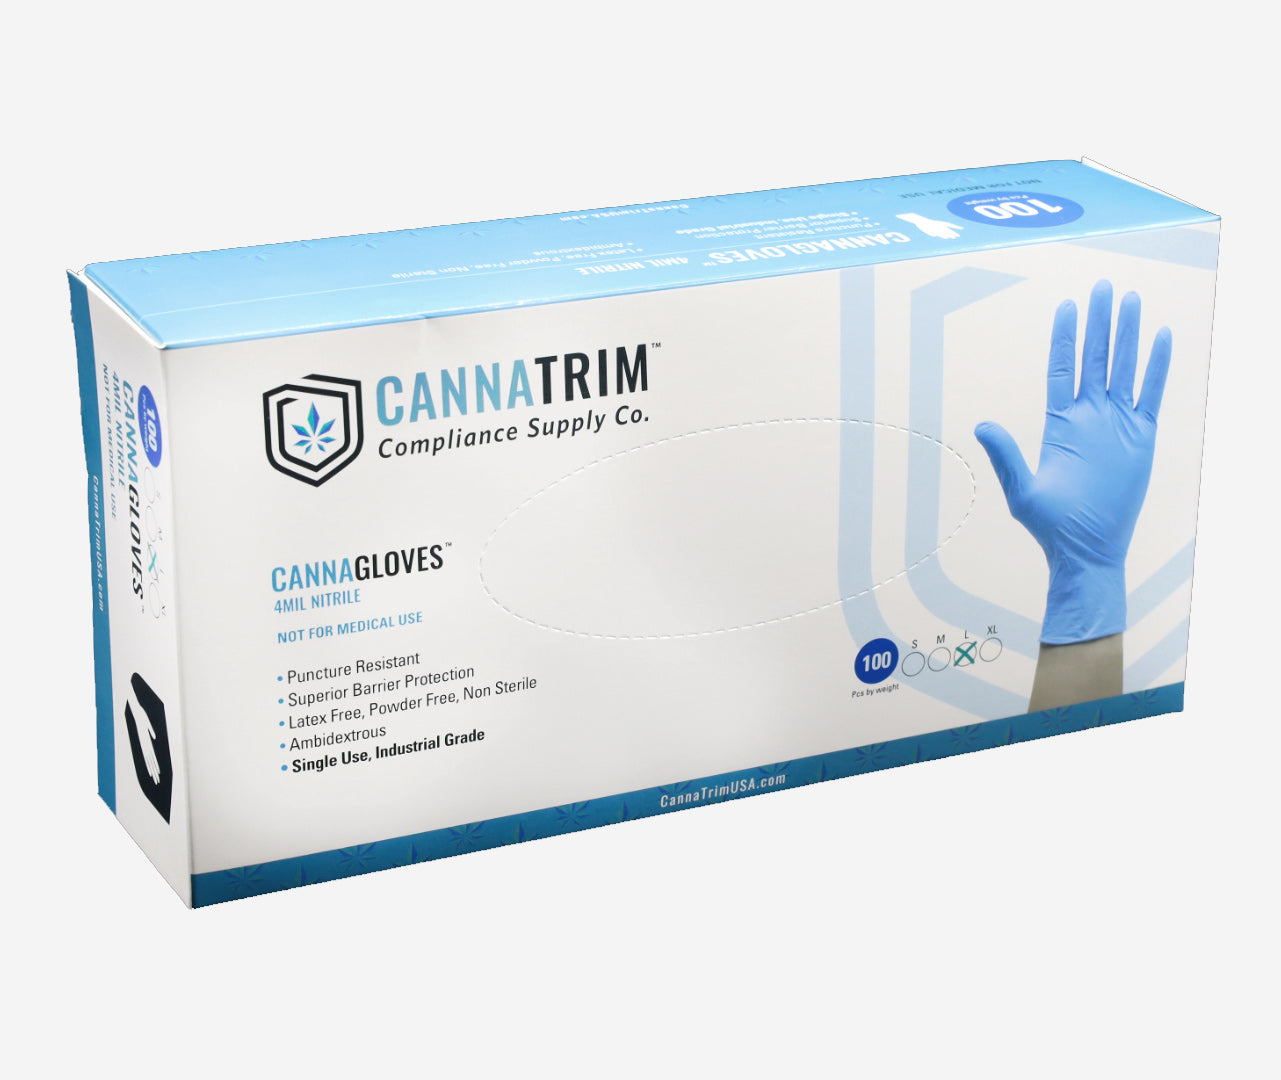 Highest quality nitrile gloves for trimming cannabis